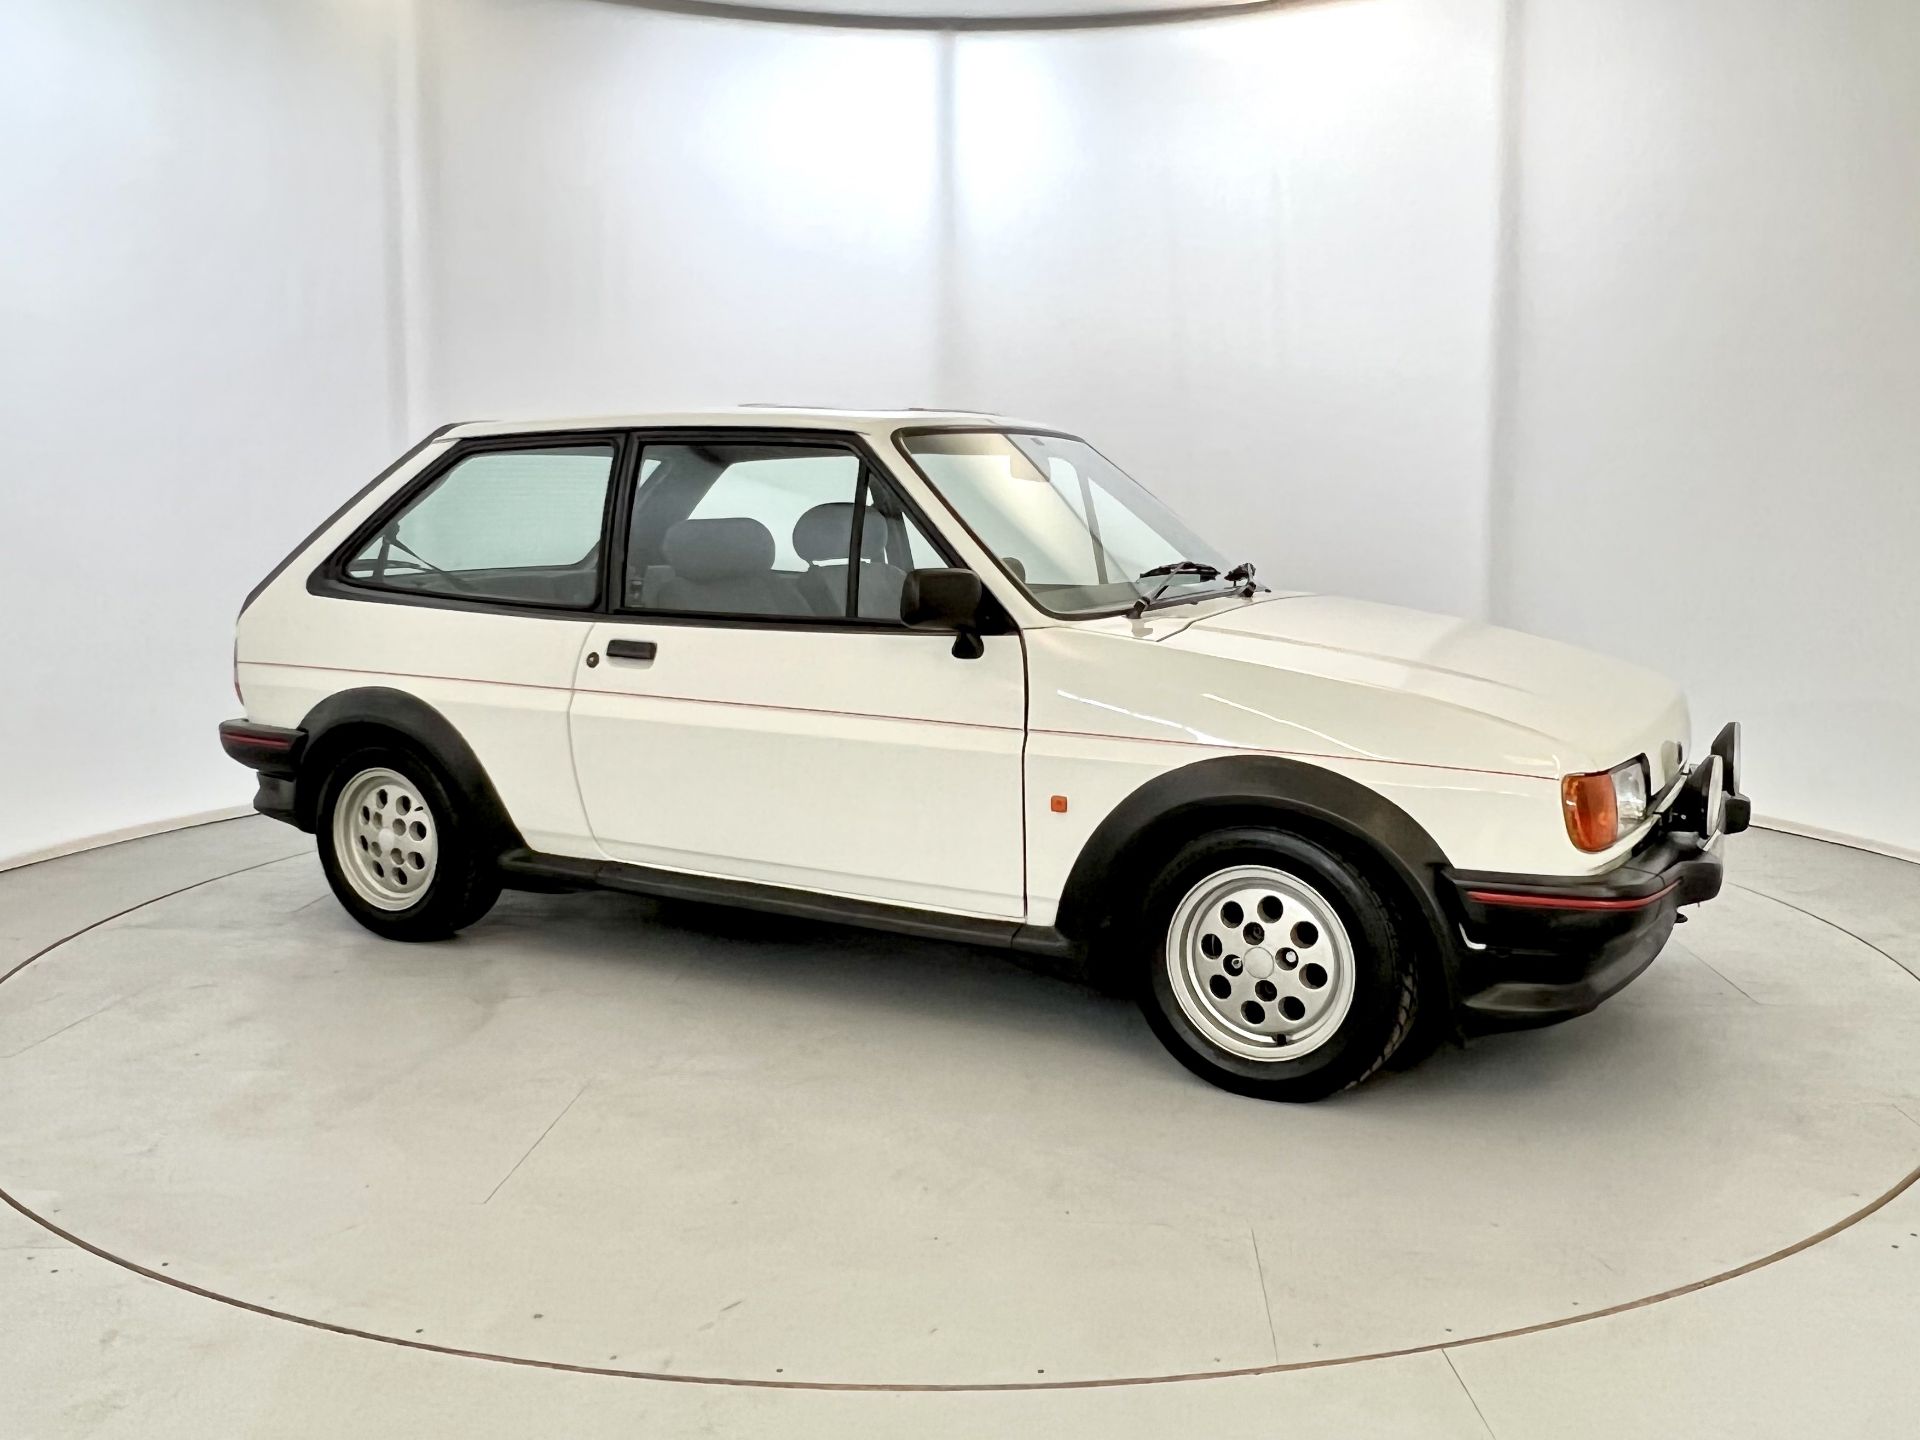 Ford Fiesta XR2 - Image 12 of 37